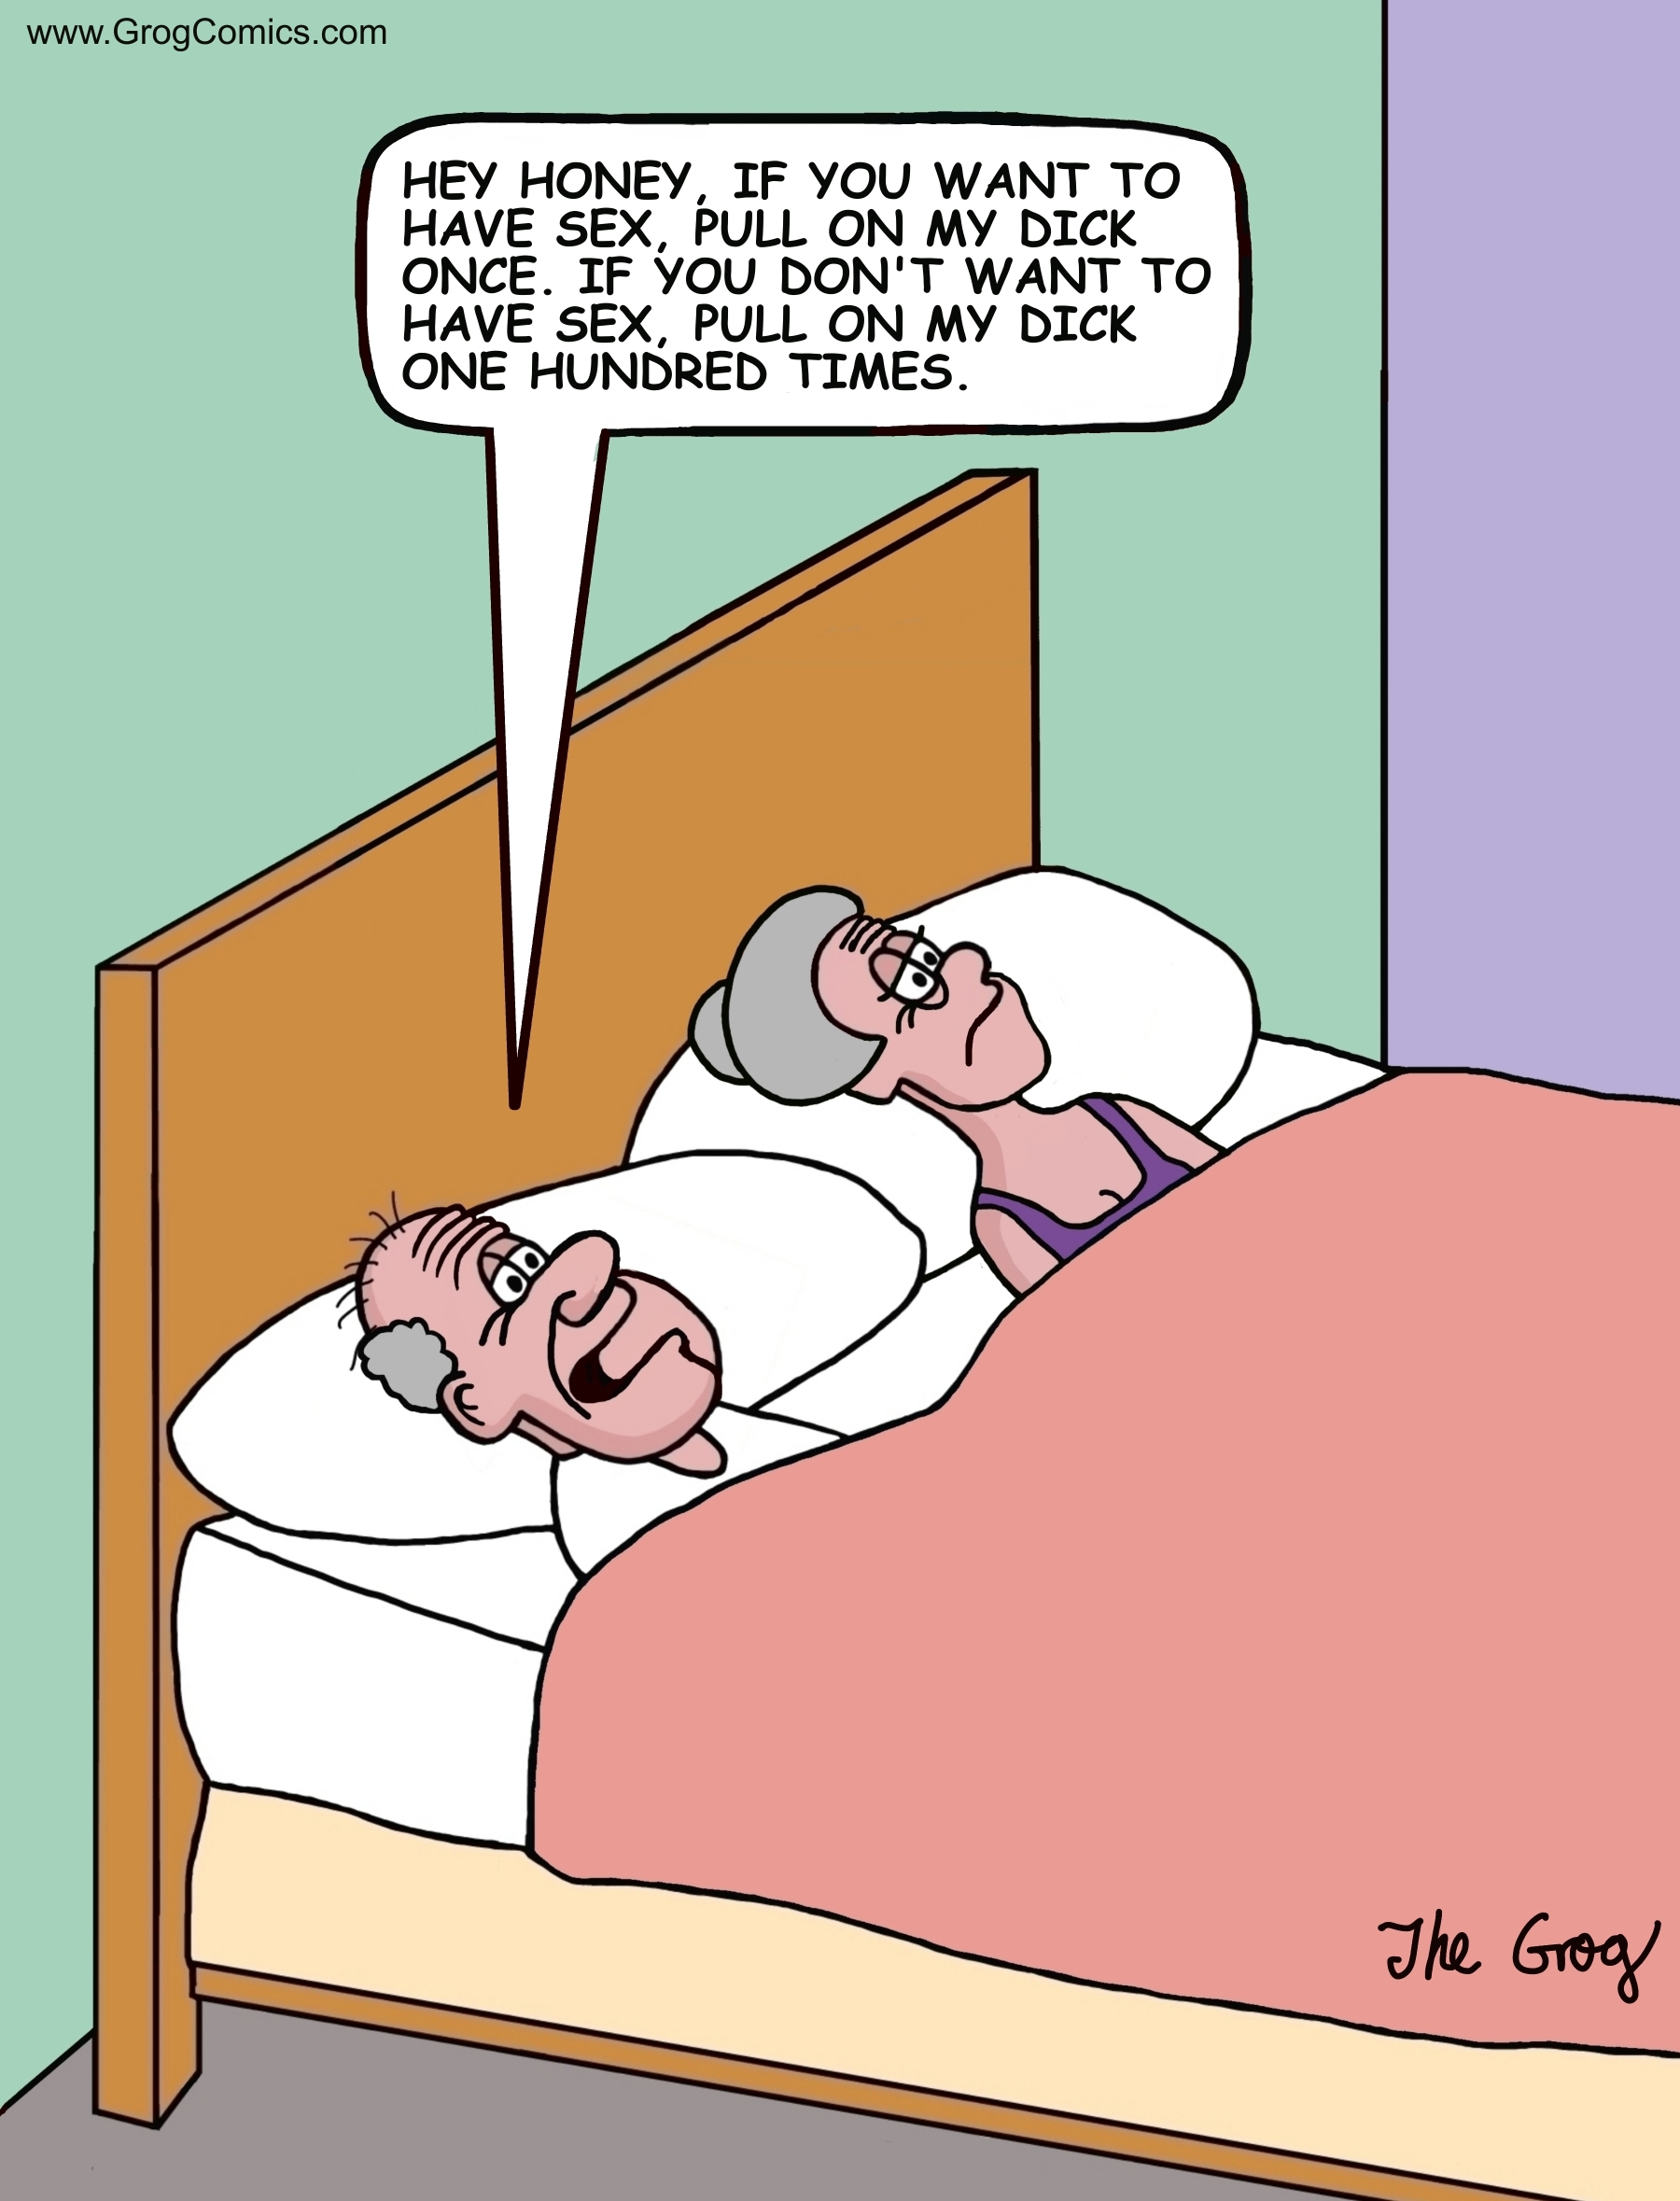 An old man and woman are lying in bed. The old man says, “Hey honey, if you want to have sex, pull on my penis once. If you don’t want to have sex, pull on my penis one hundred times.”